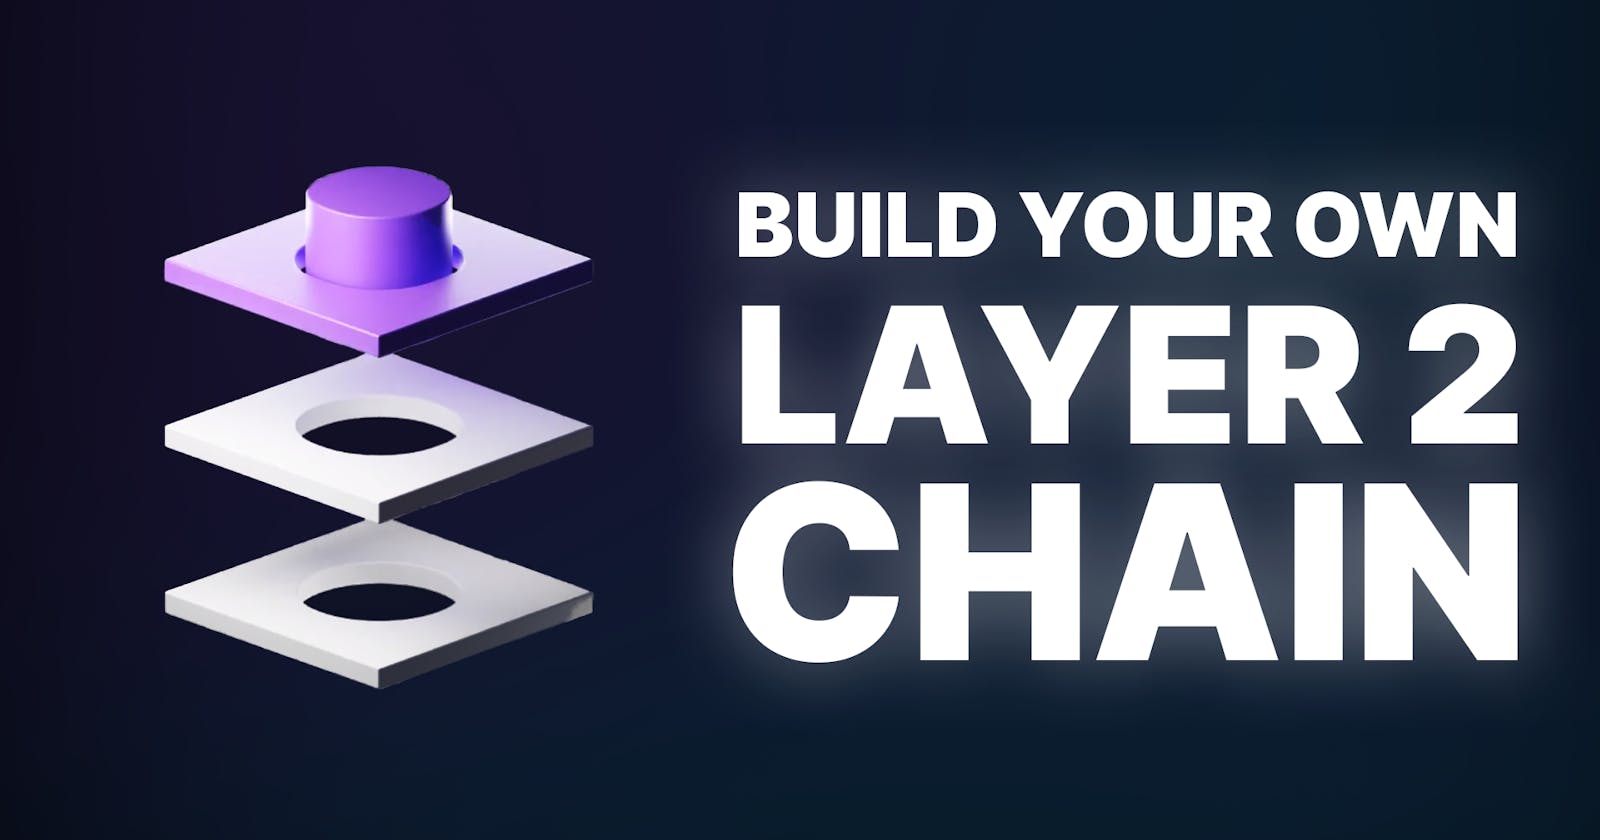 Build Your Own Layer 2 Blockchain (using Polygon CDK)